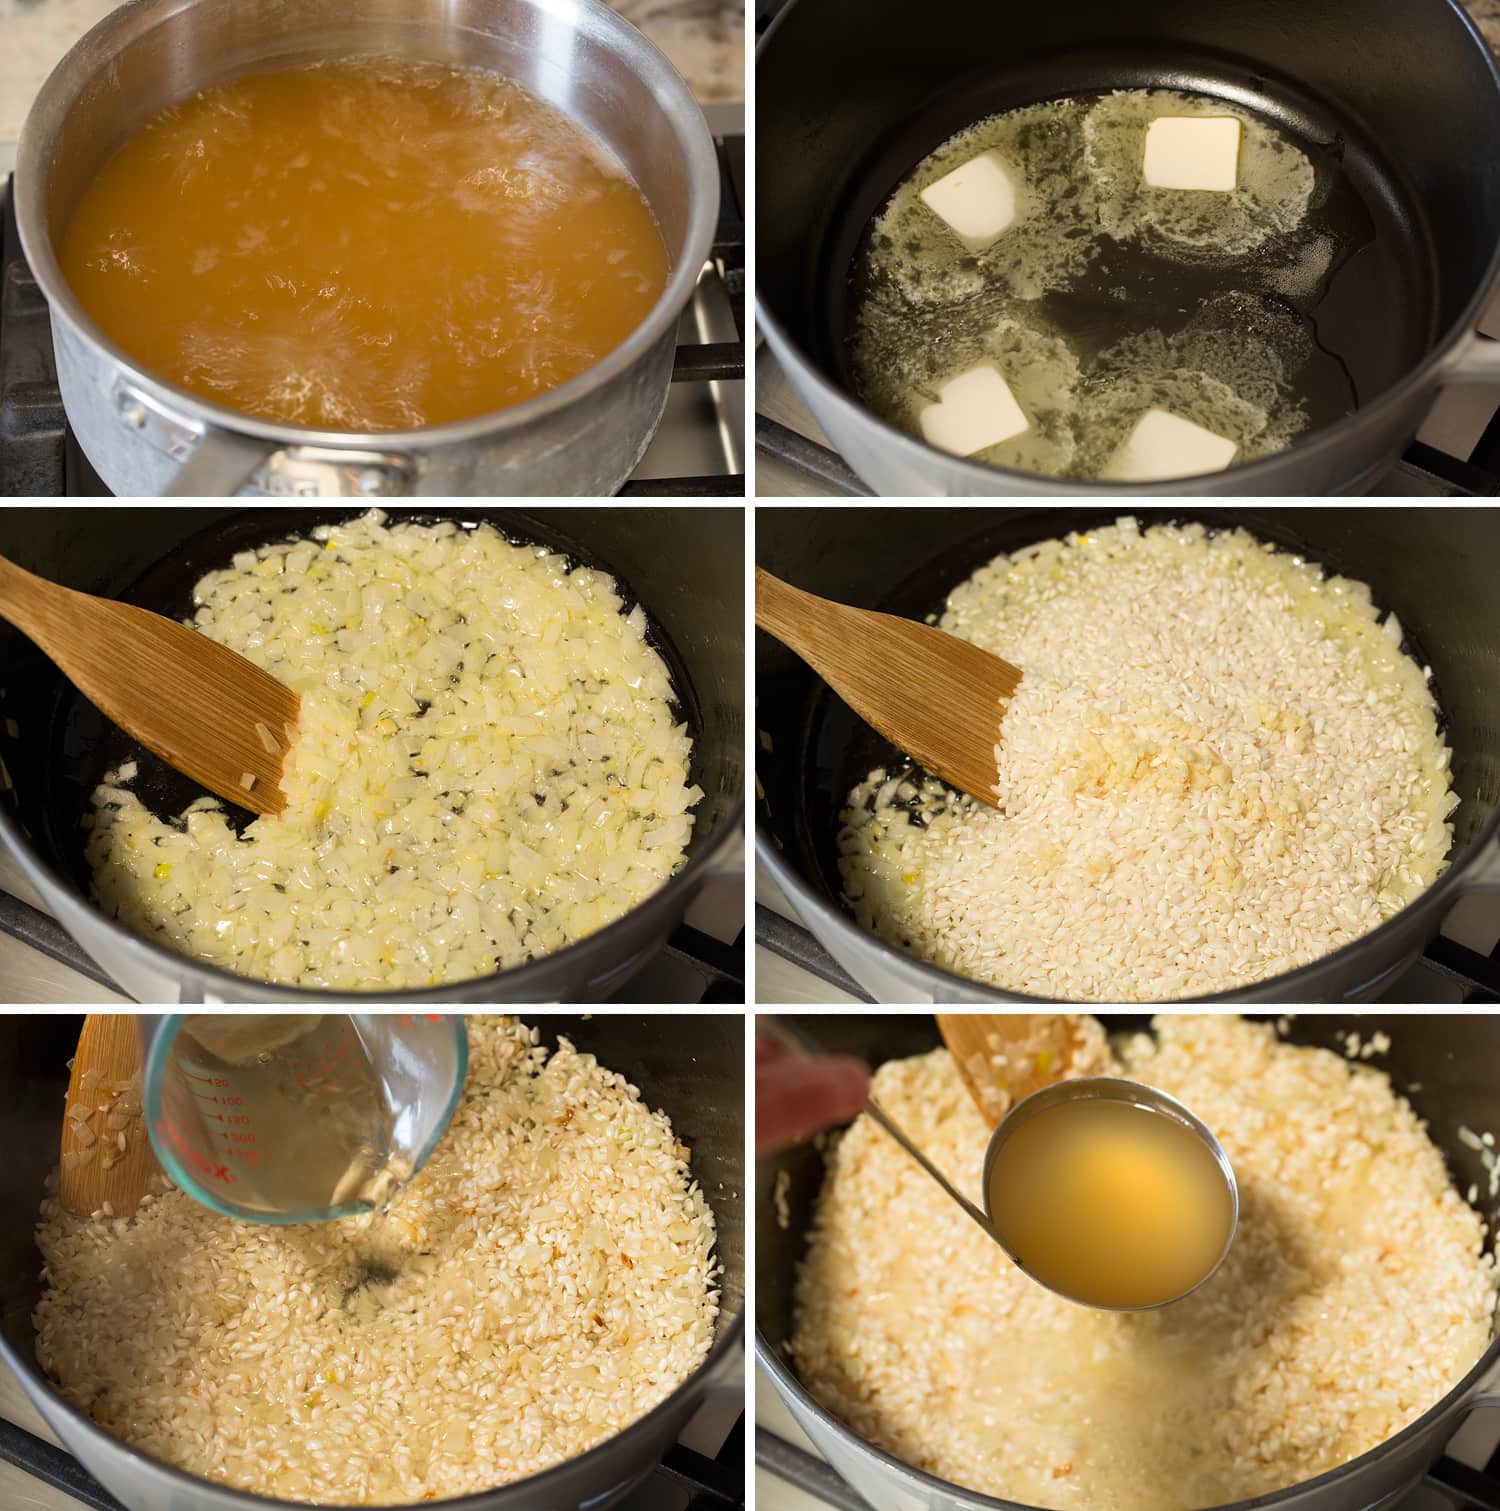 Steps of making risotto in a large pot.